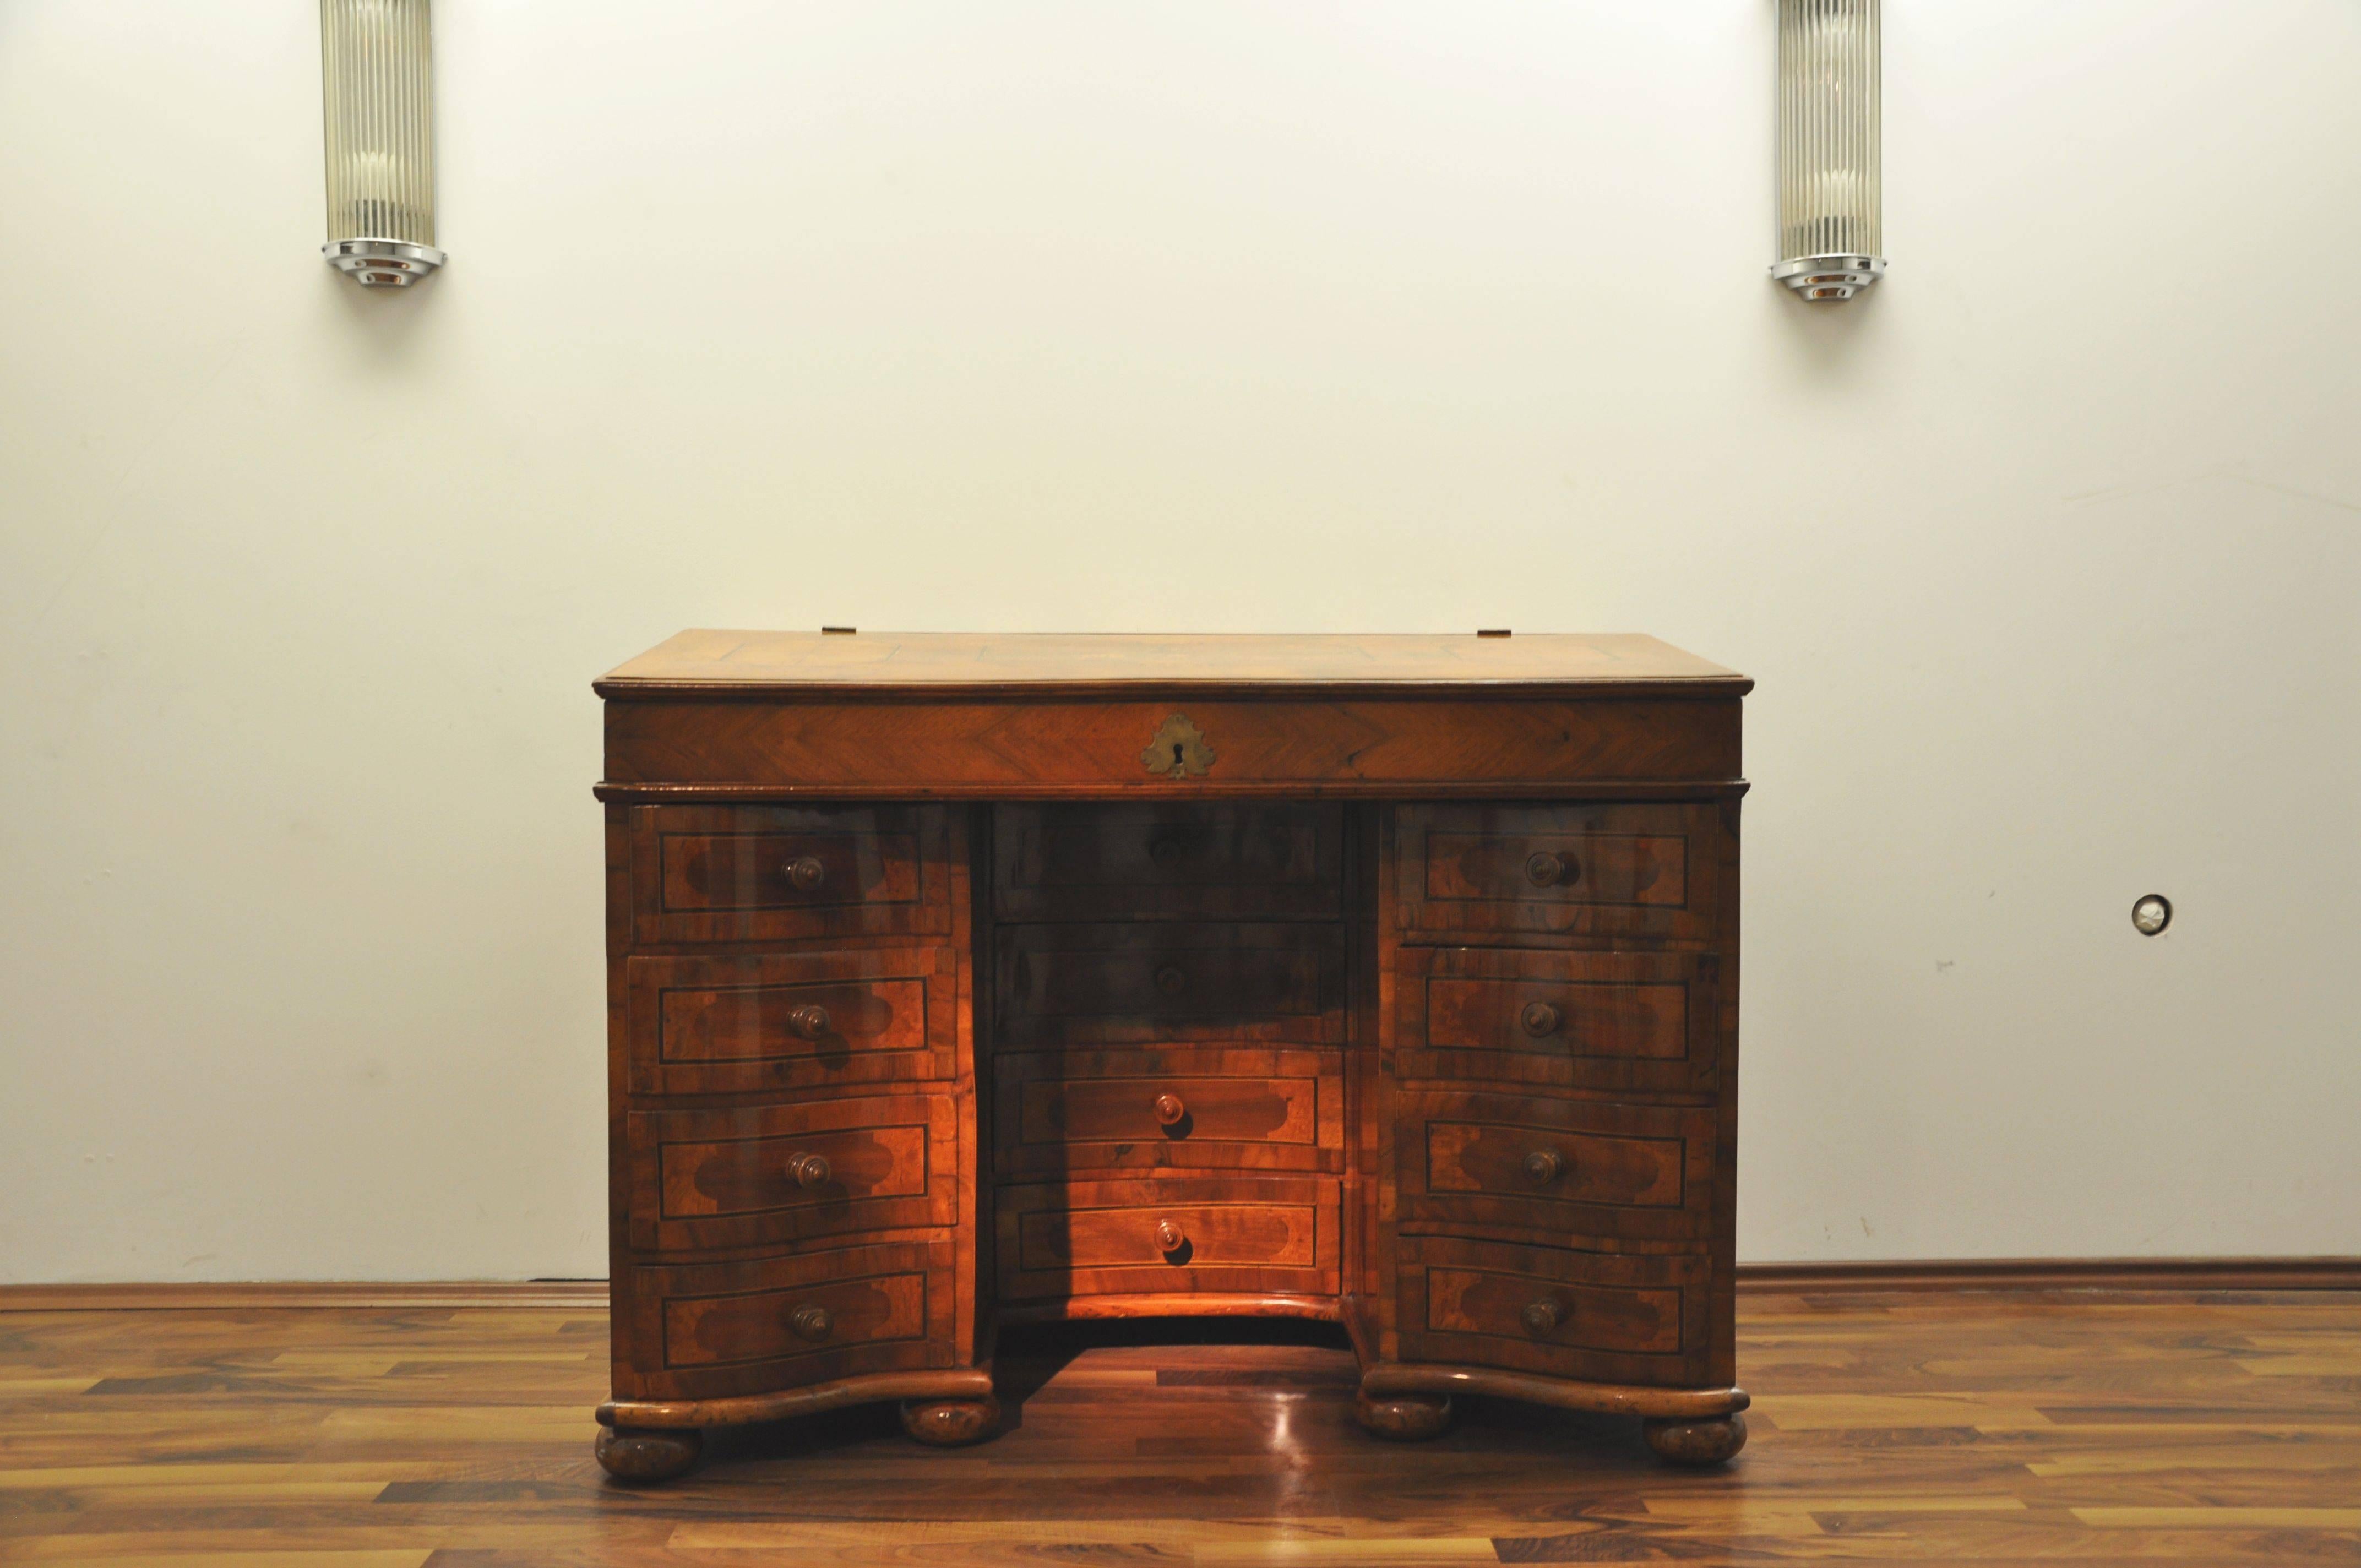 - geographic Origin: Baden, Germany 1760
- veneered walnut wood
- figurative marquetry in different precious woods
- countertop and drawers
- perfect restored condition
- shellac lacquer

One of the most unusual furniture pieces from europe!